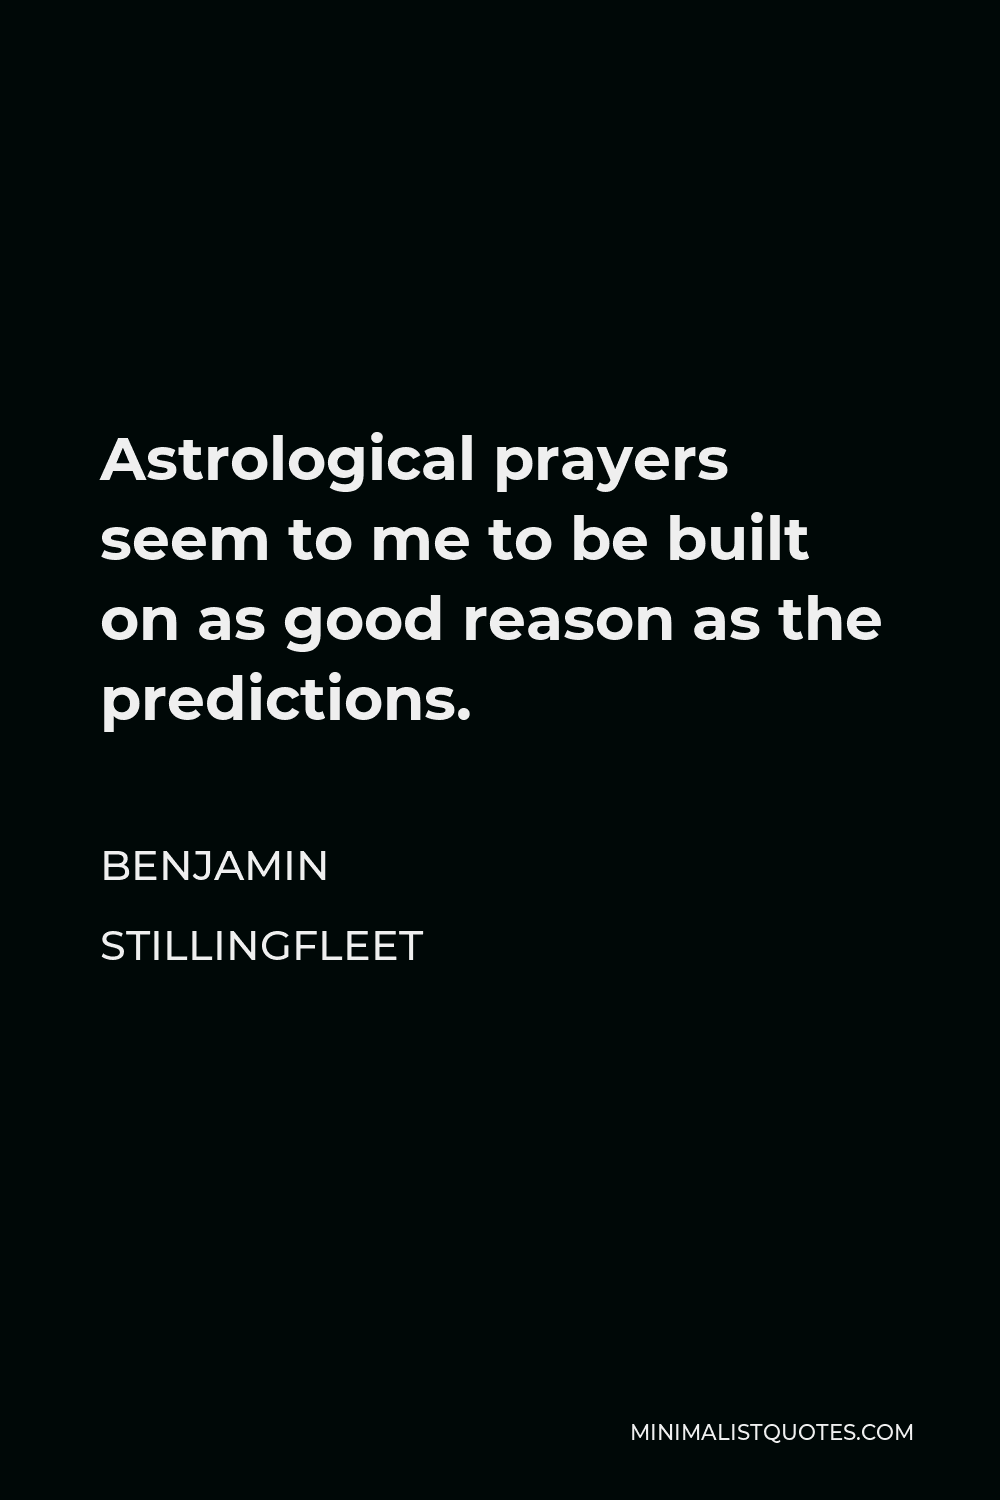 Benjamin Stillingfleet Quote - Astrological prayers seem to me to be built on as good reason as the predictions.